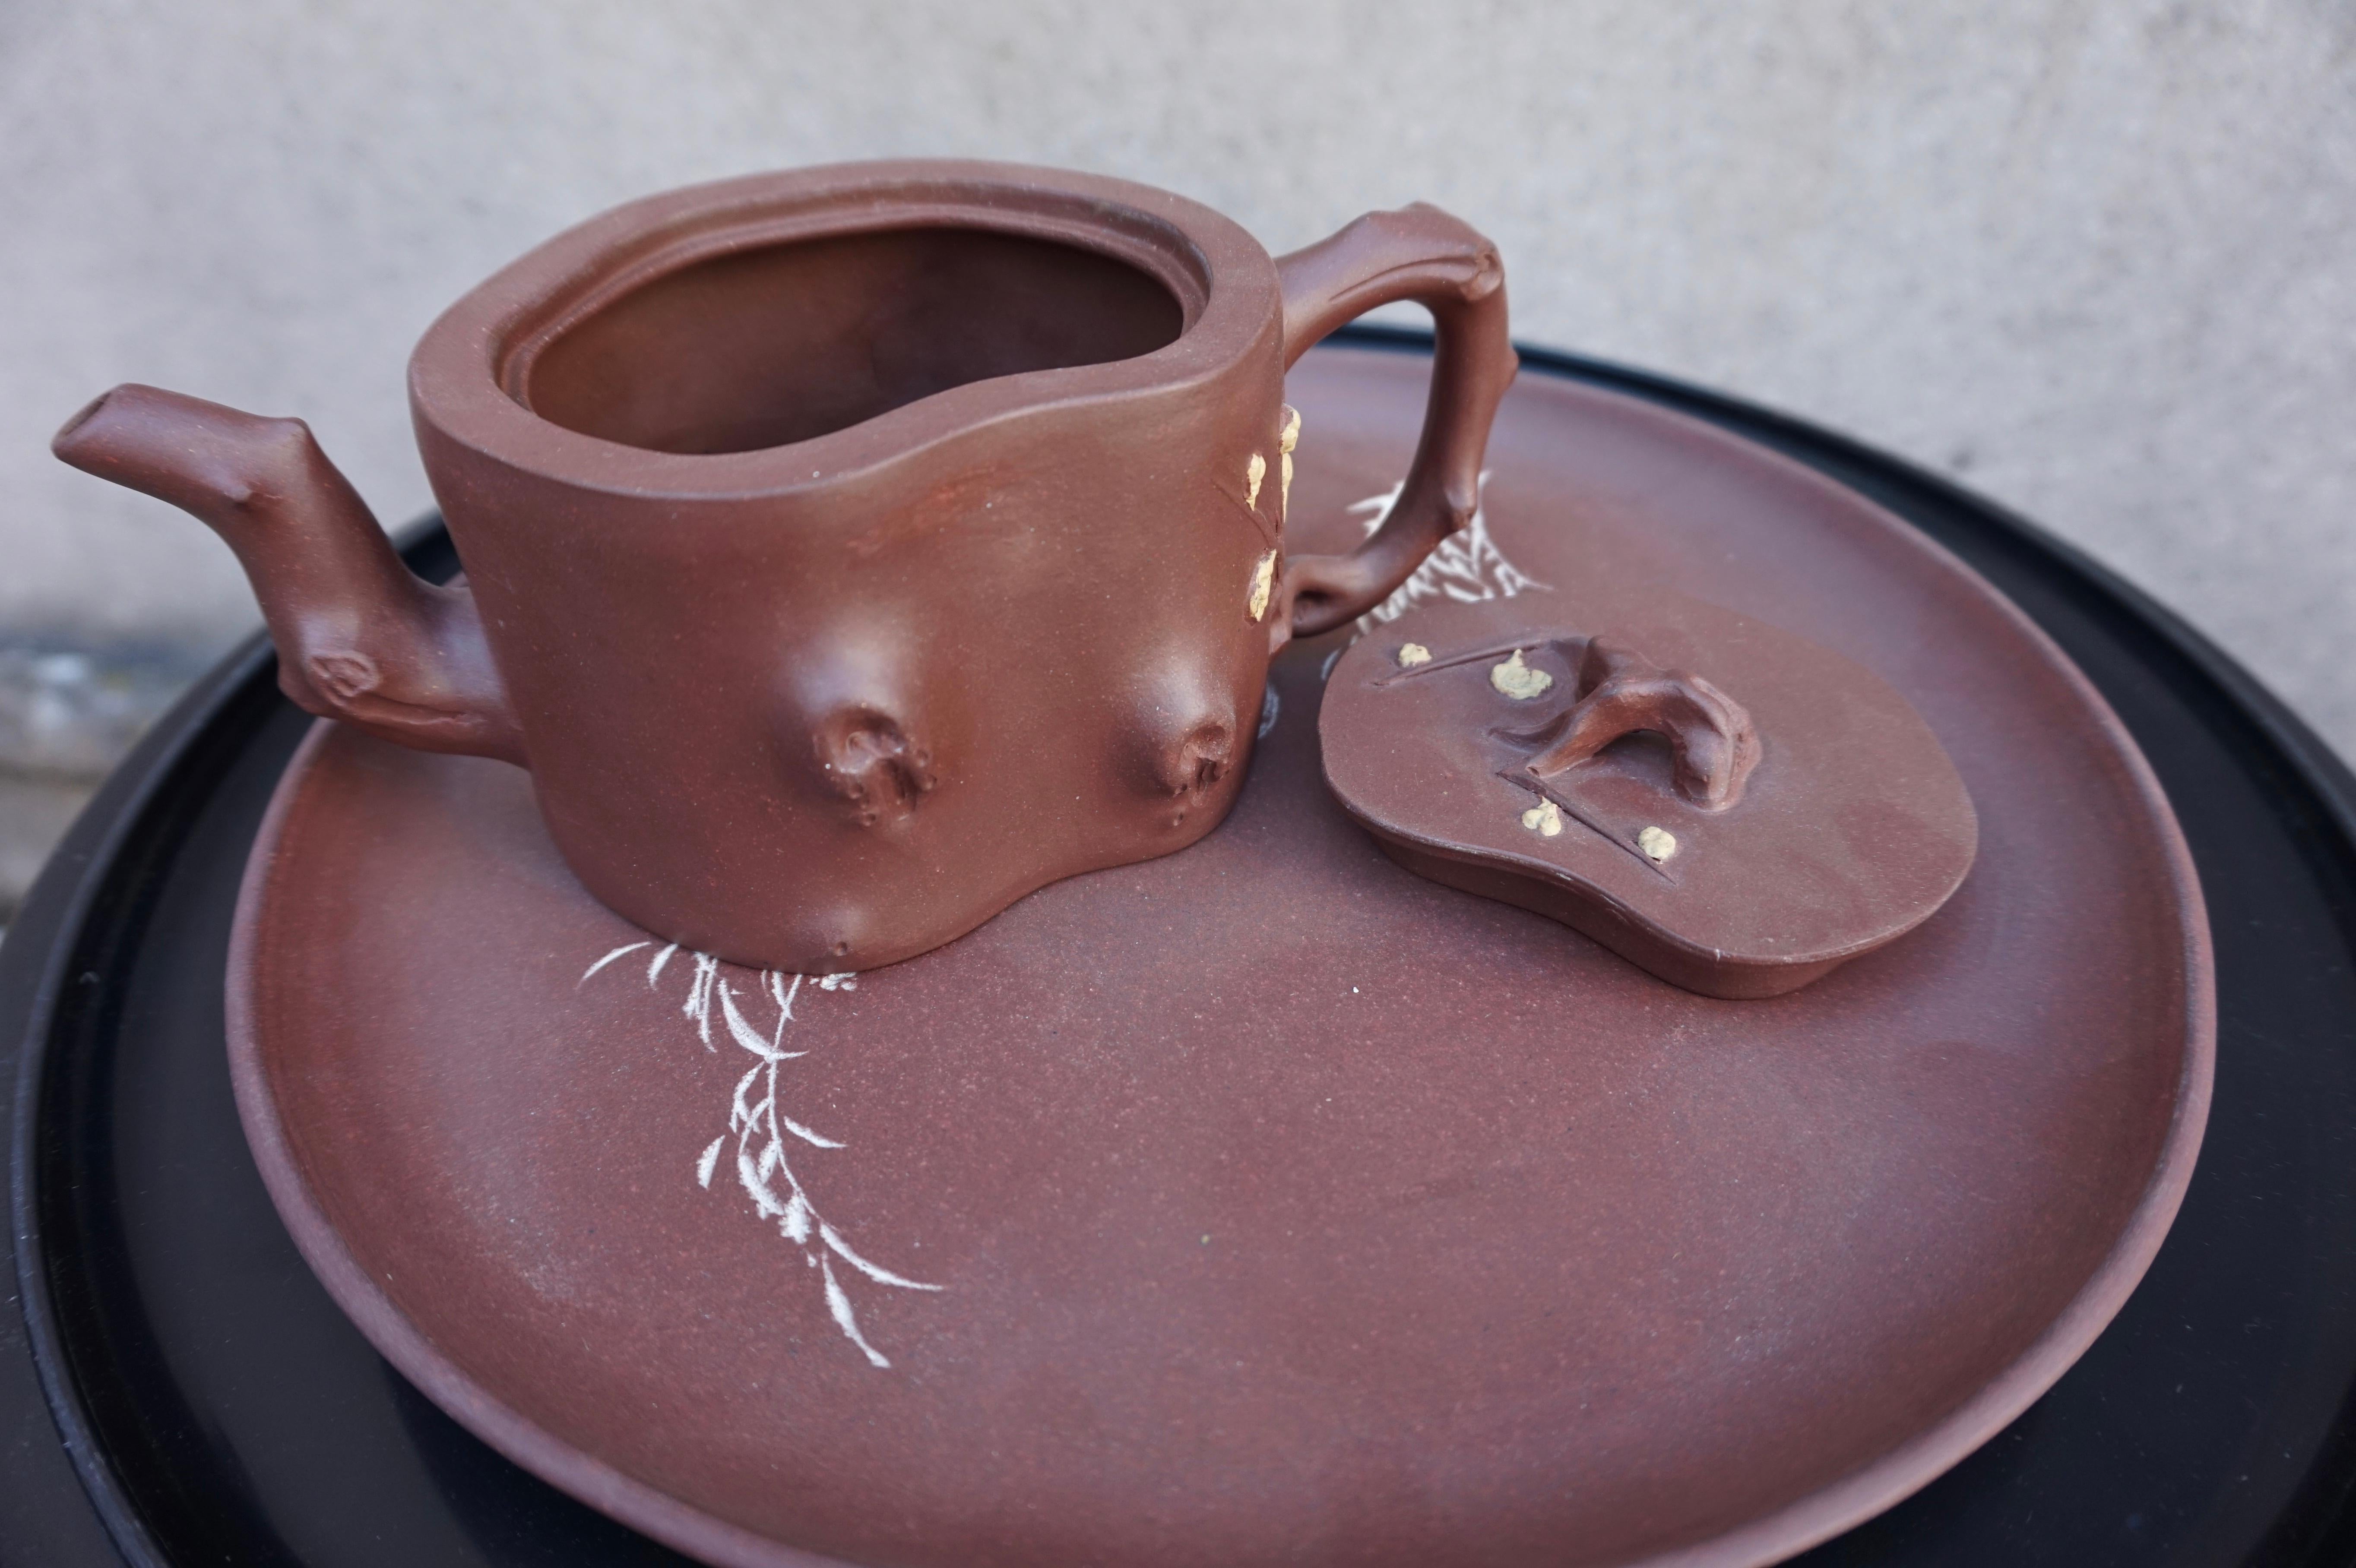 Hand-Crafted Very Fine Handmade Yixing Wear Tea Set With Blossom Motif